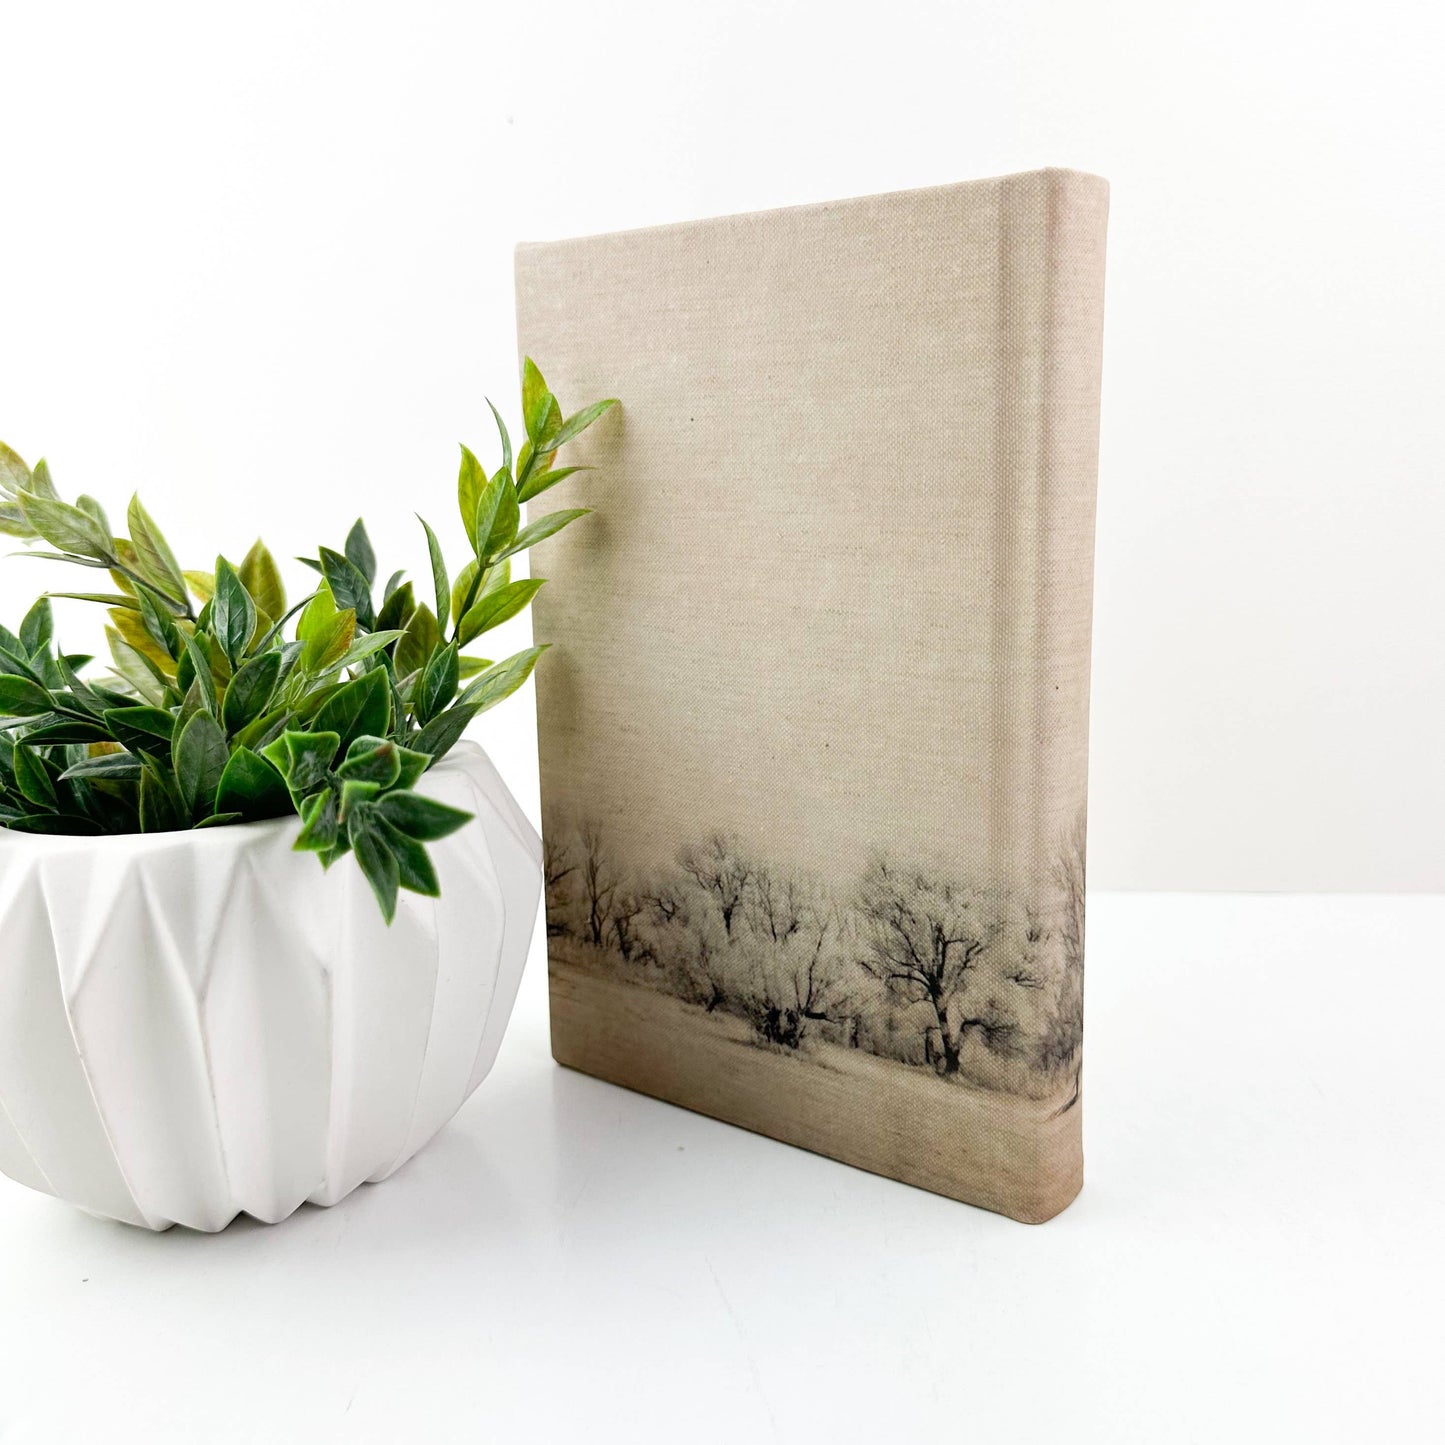 Wrapped Decorative Book with Tree.